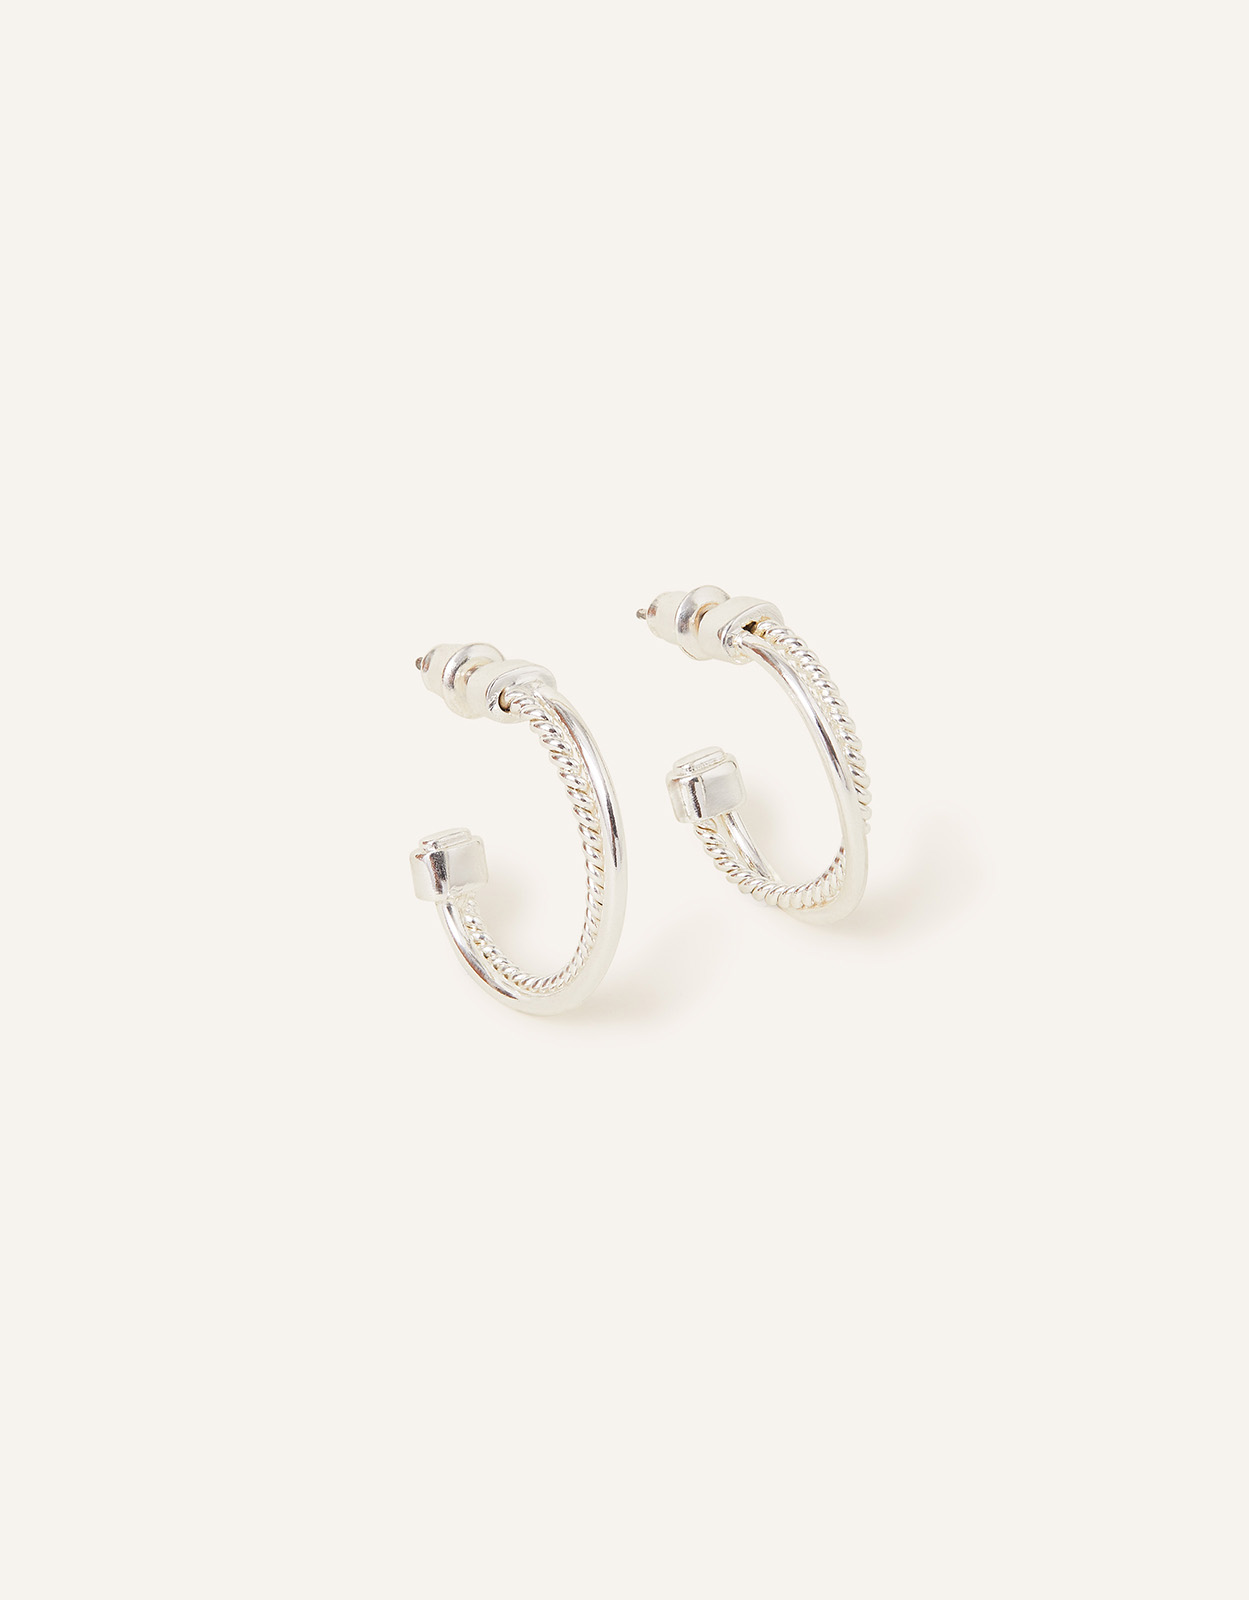 Accessorize Women's Sterling Silver-Plated Thin Twisted Hoops